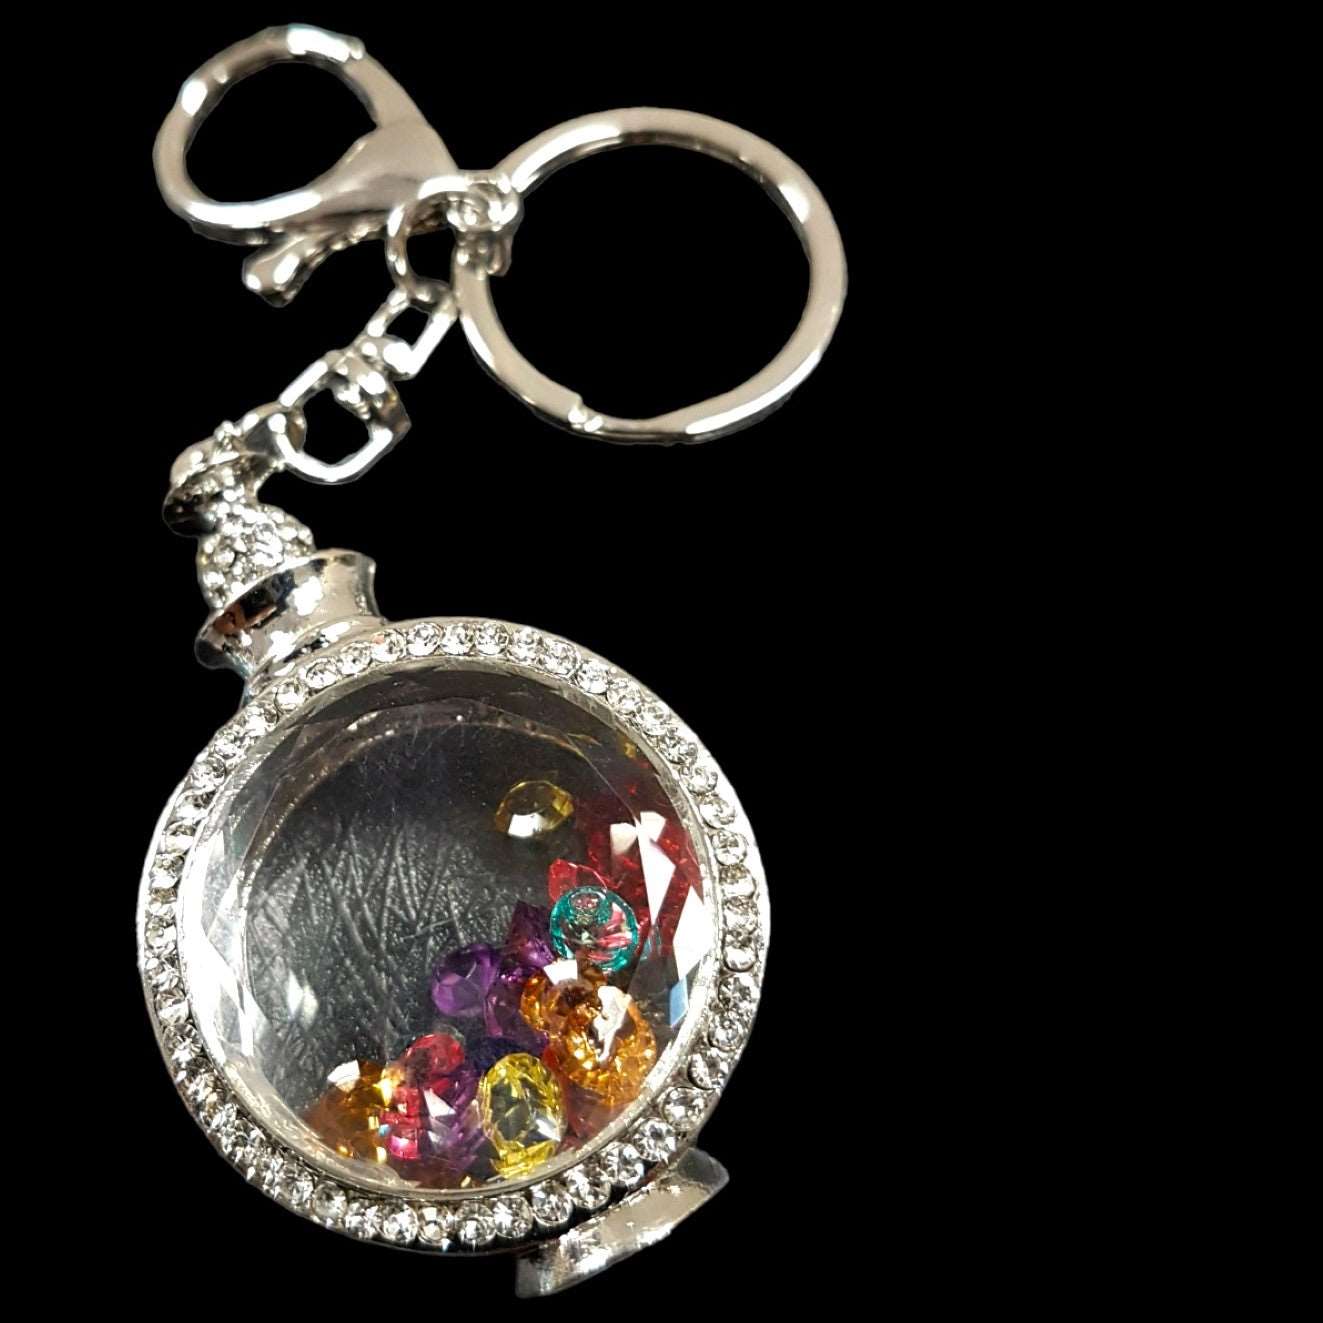 Bottle shaped purse charm with clear and colorful stones